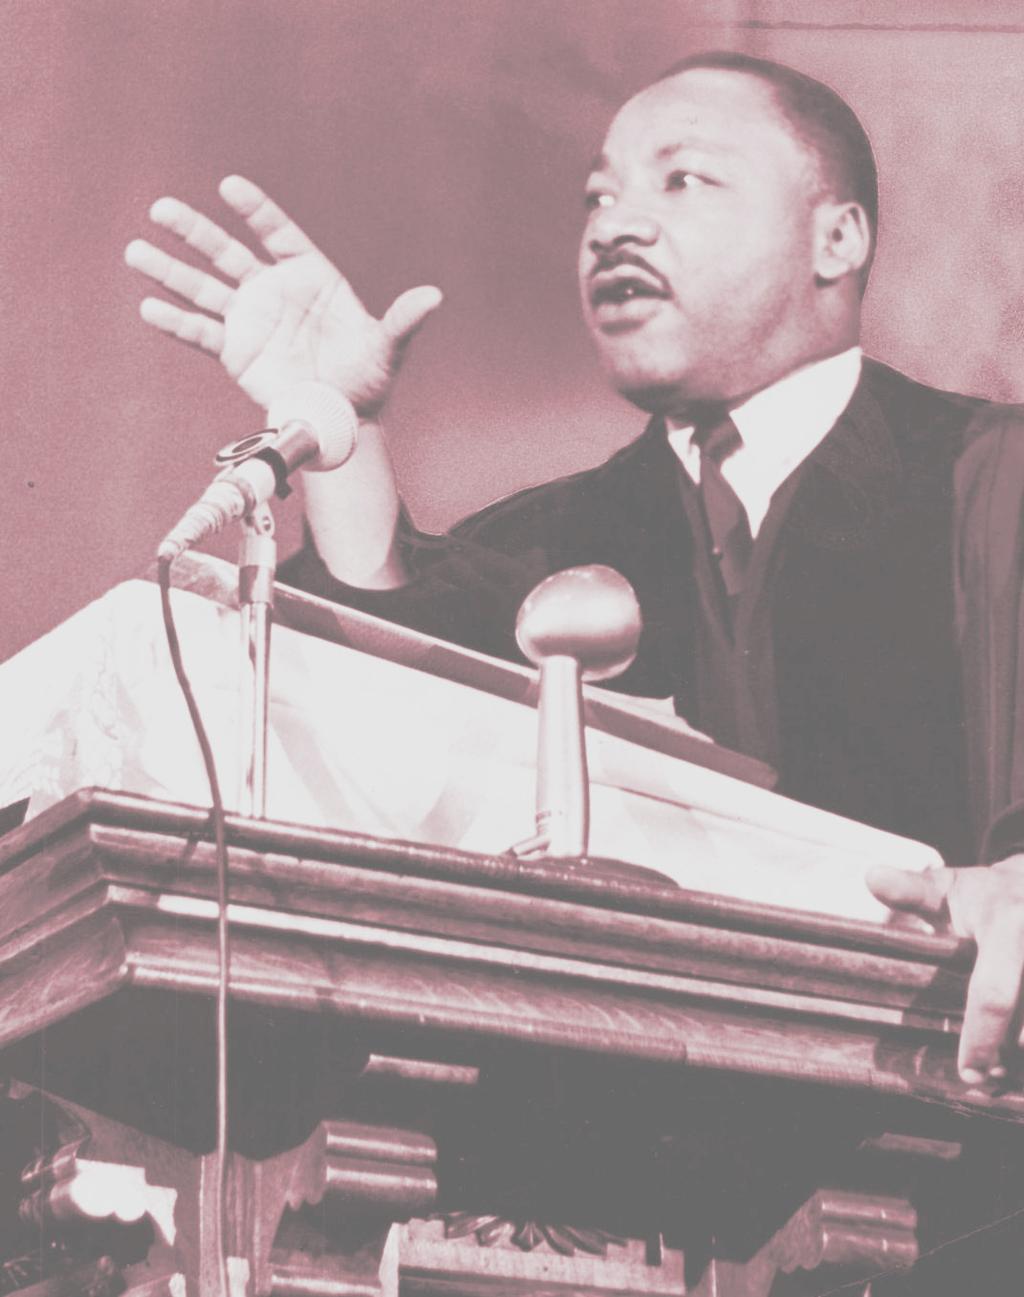 Sundays in Lent To the Mountaintop: The Sermons of Martin Luther King, Jr. A Collaborative Sunday Series with St. Matthias Feb. 18 at St.